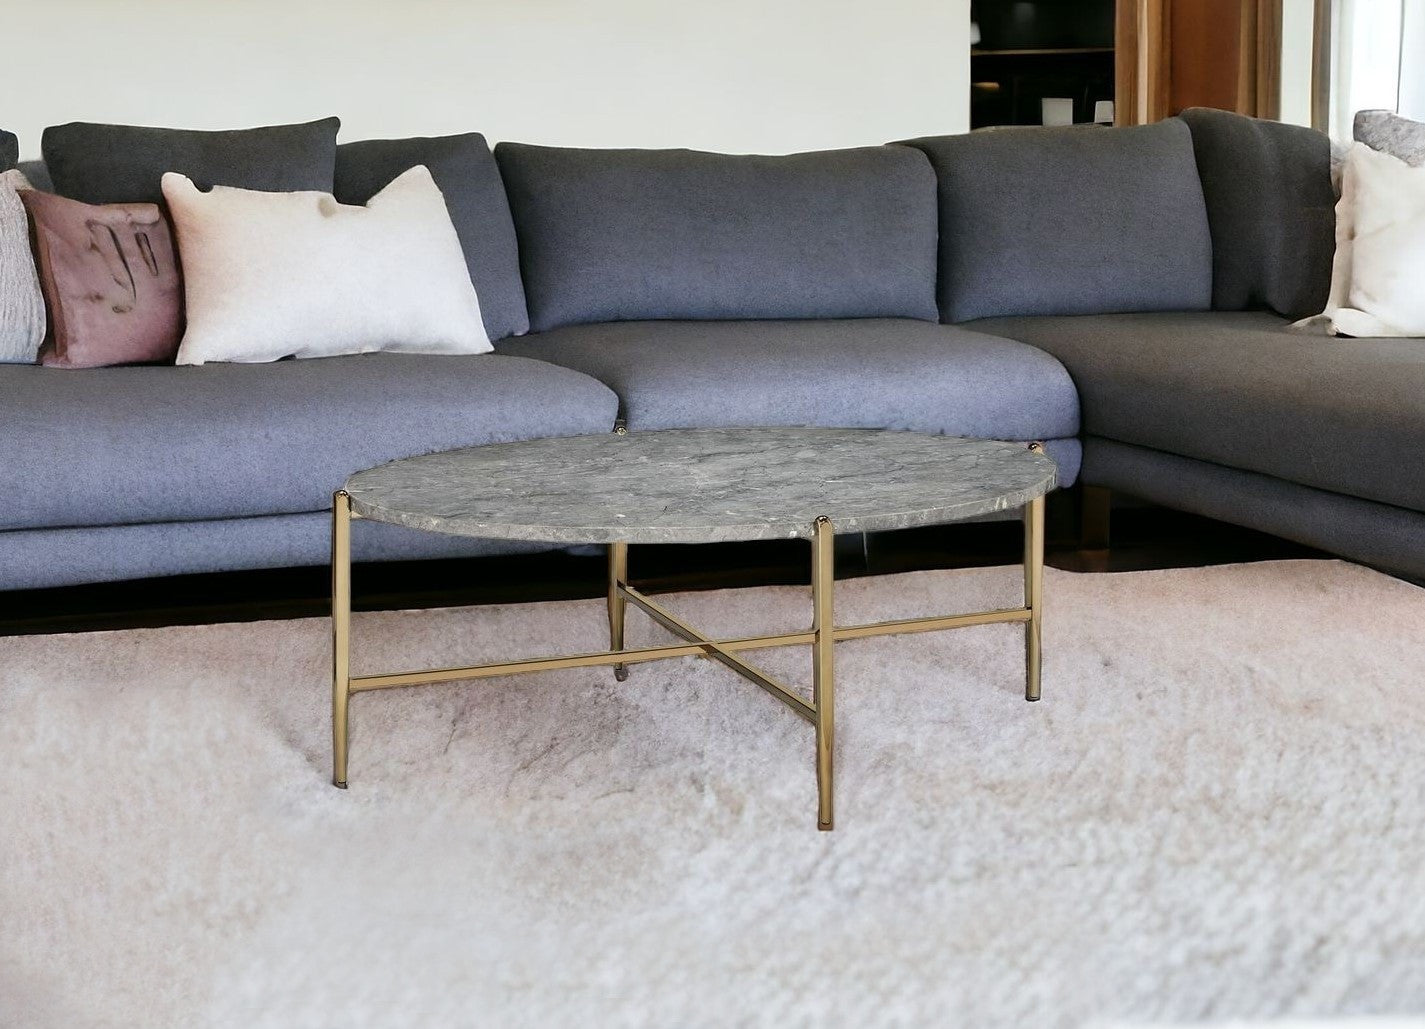 48" Gray And Champagne Faux Marble And Metal Oval Coffee Table